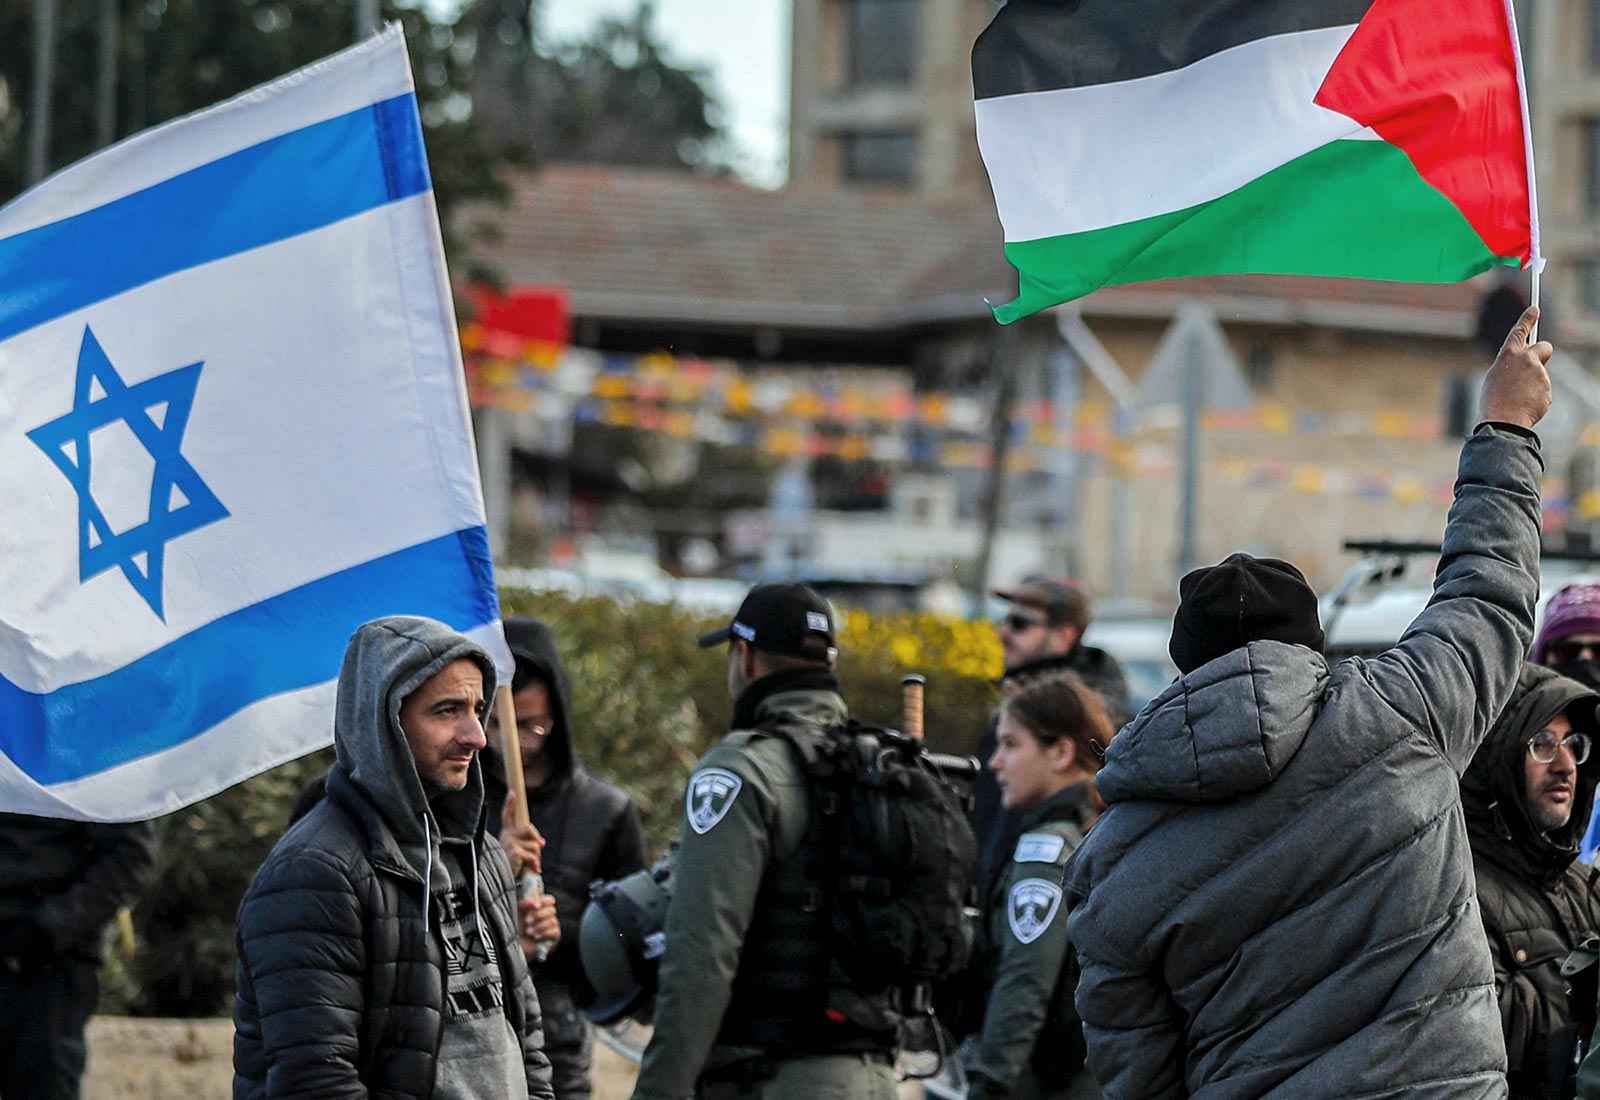 Principles for a Just and Lasting Peace between Palestinians and Israelis